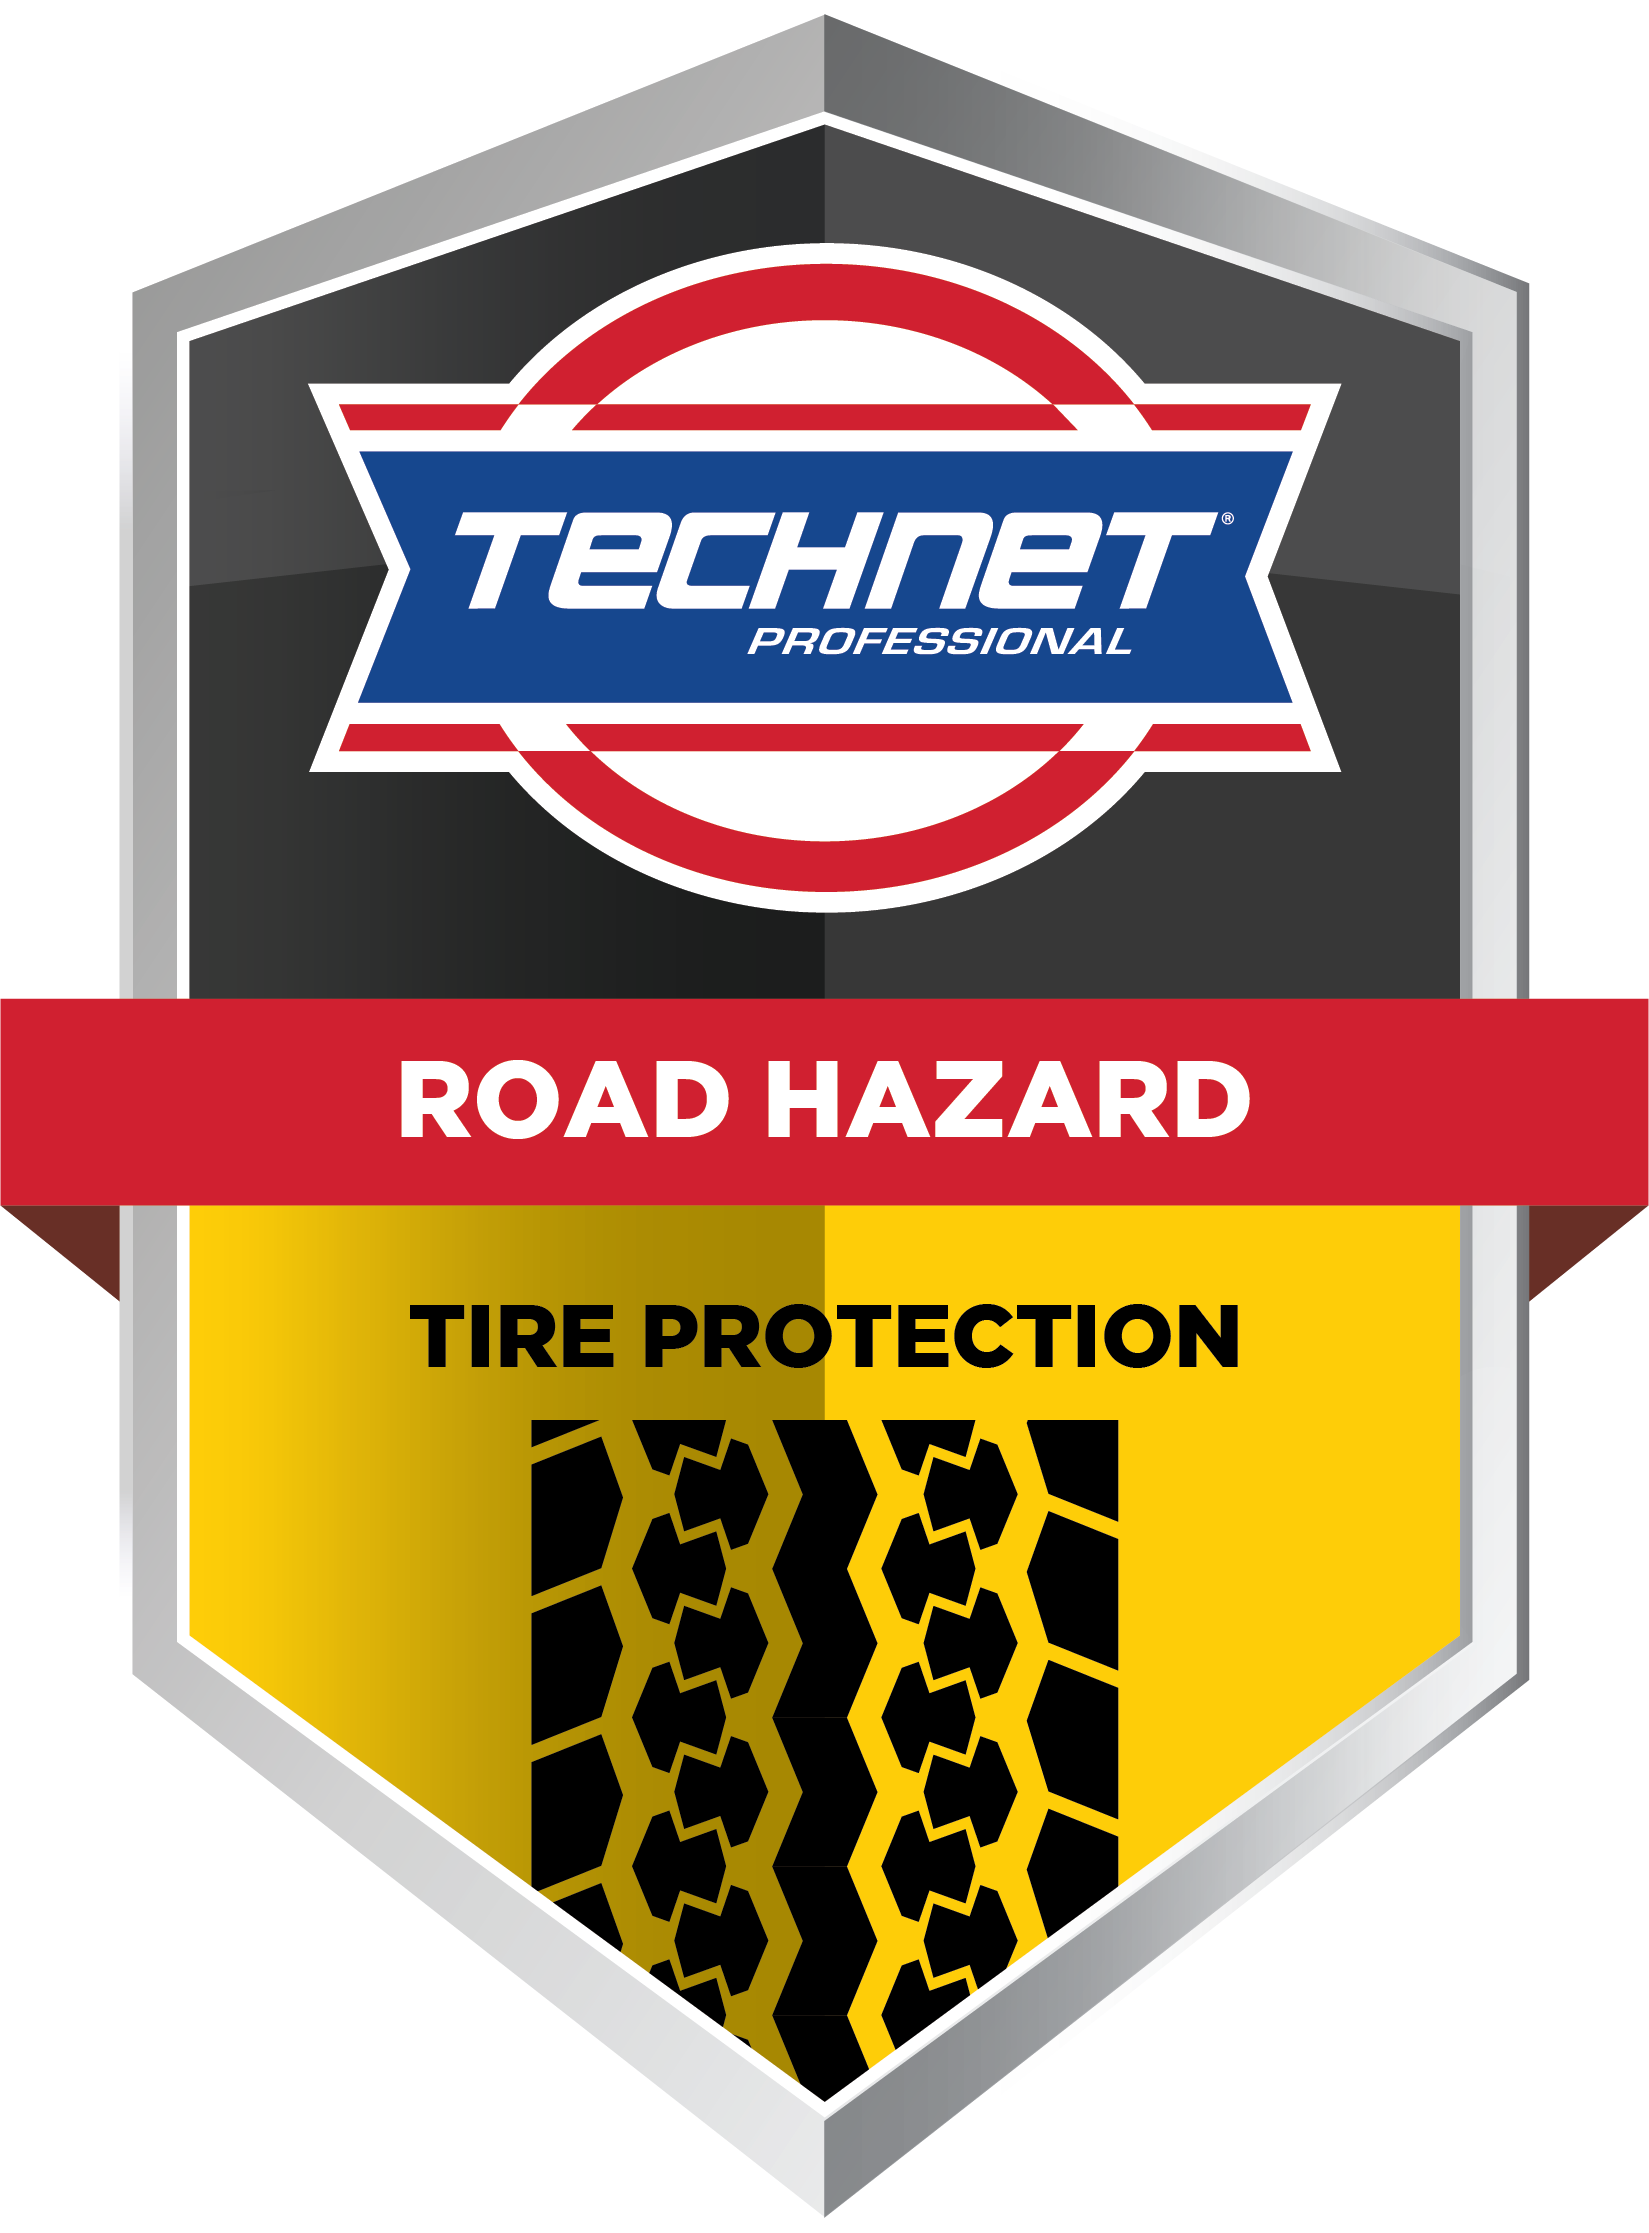 Technet Road Hazard Tire Protection | Wynne's Express Lube & Auto Repair Inc.